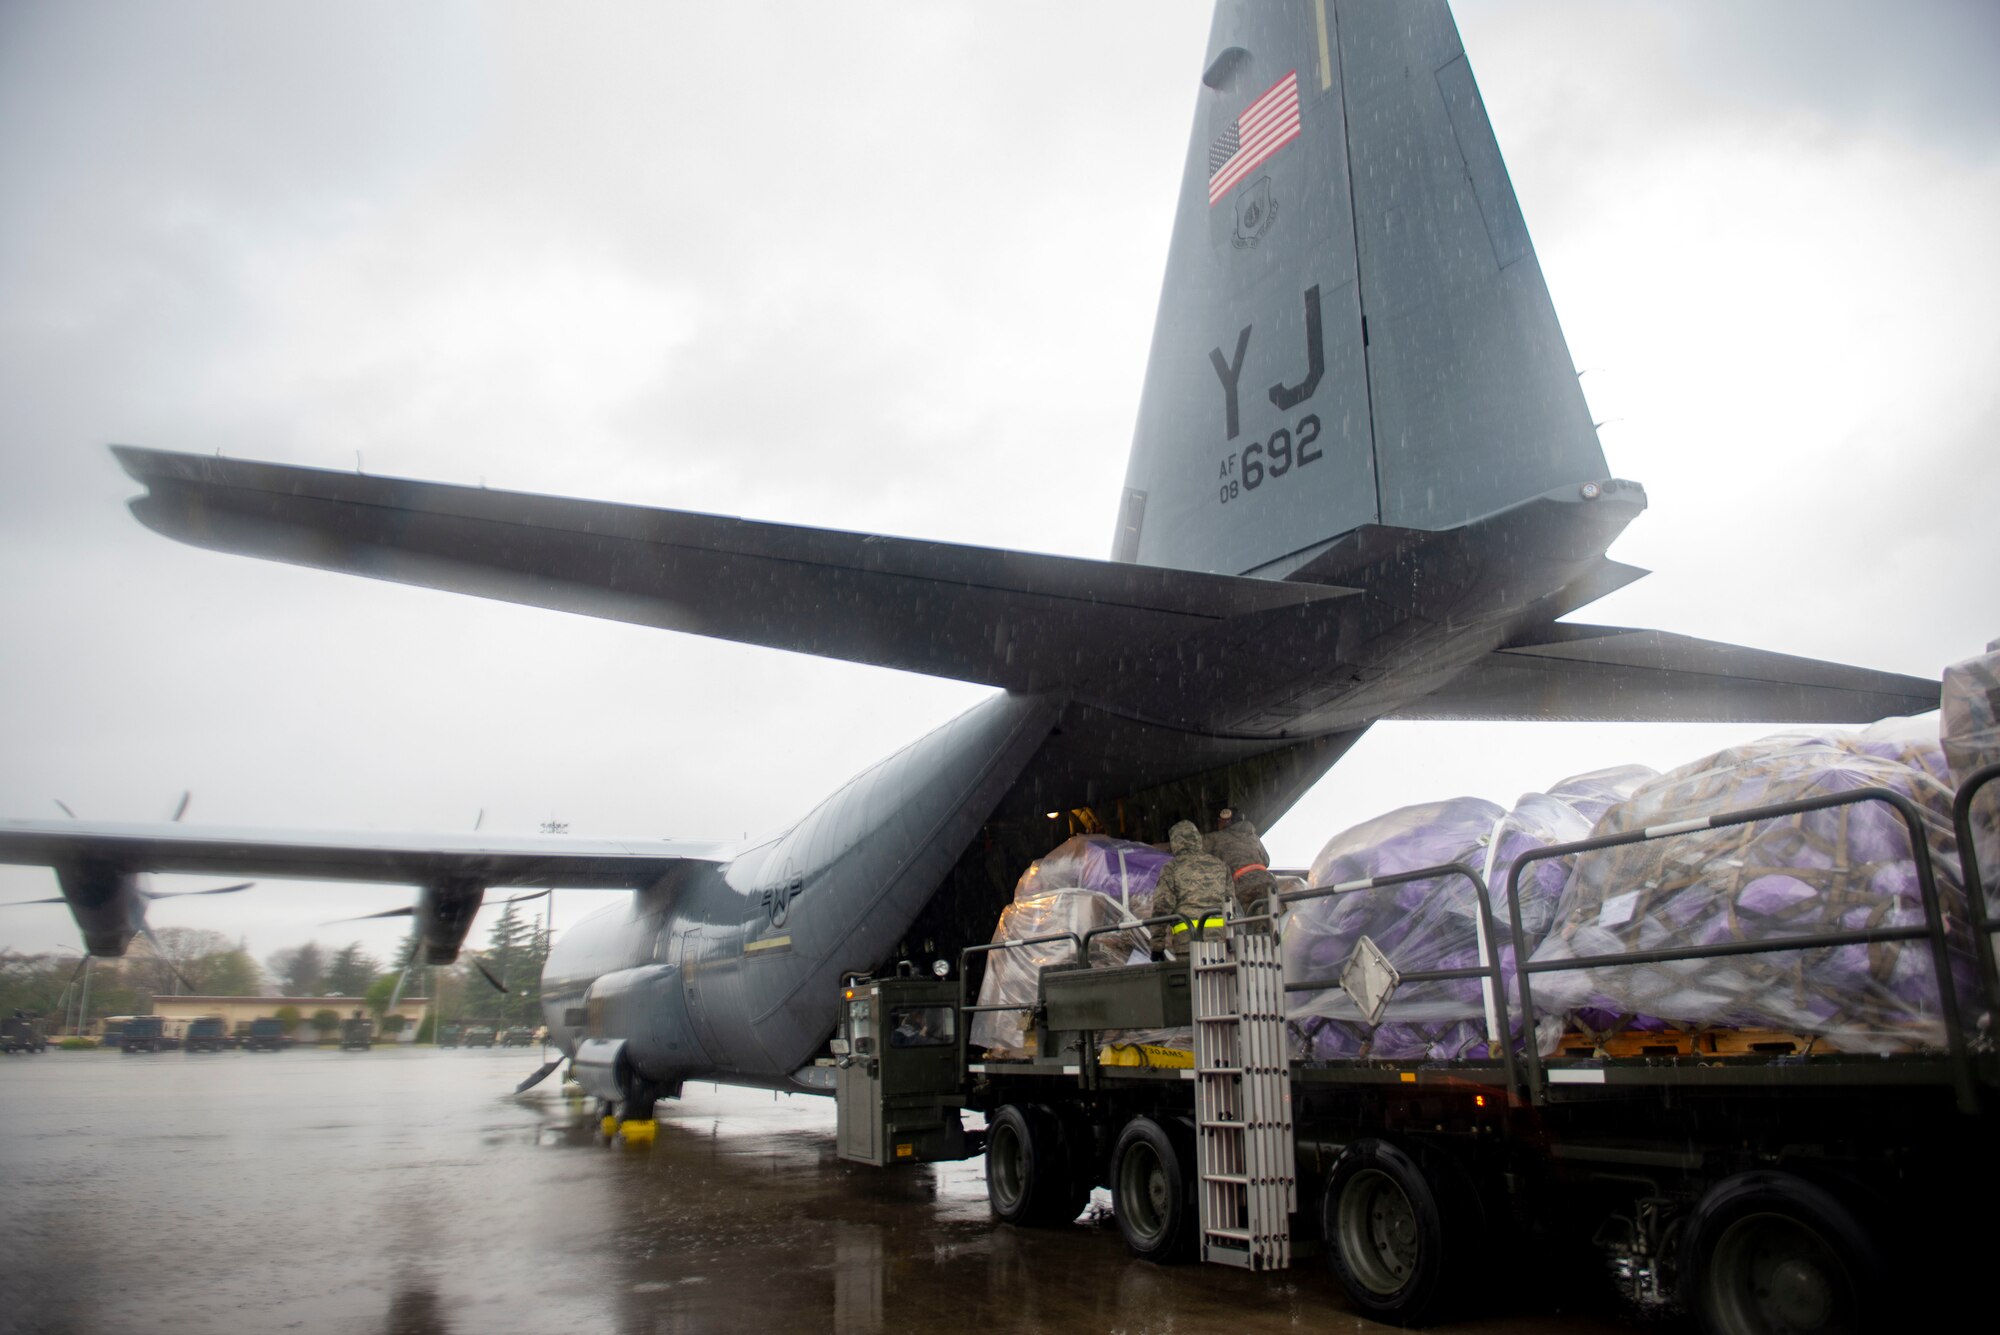 Airmen with 730th Air Mobility Squadron load pallets of mail on a C-130J Super Hercules, assigned to the 36th Airlift Squadron, on the flight line at Yokota Air Base, Japan, April 18, 2020. Due to COVID-19, planes that would normally take the mail, bound for Misawa Air Base, Japan, from Haneda or Narita Airport, have been reduced to one flight per day, requiring the mail to be processed and flown through Yokota. (U.S. Air Force photo by Senior Airman Gabrielle Spalding)